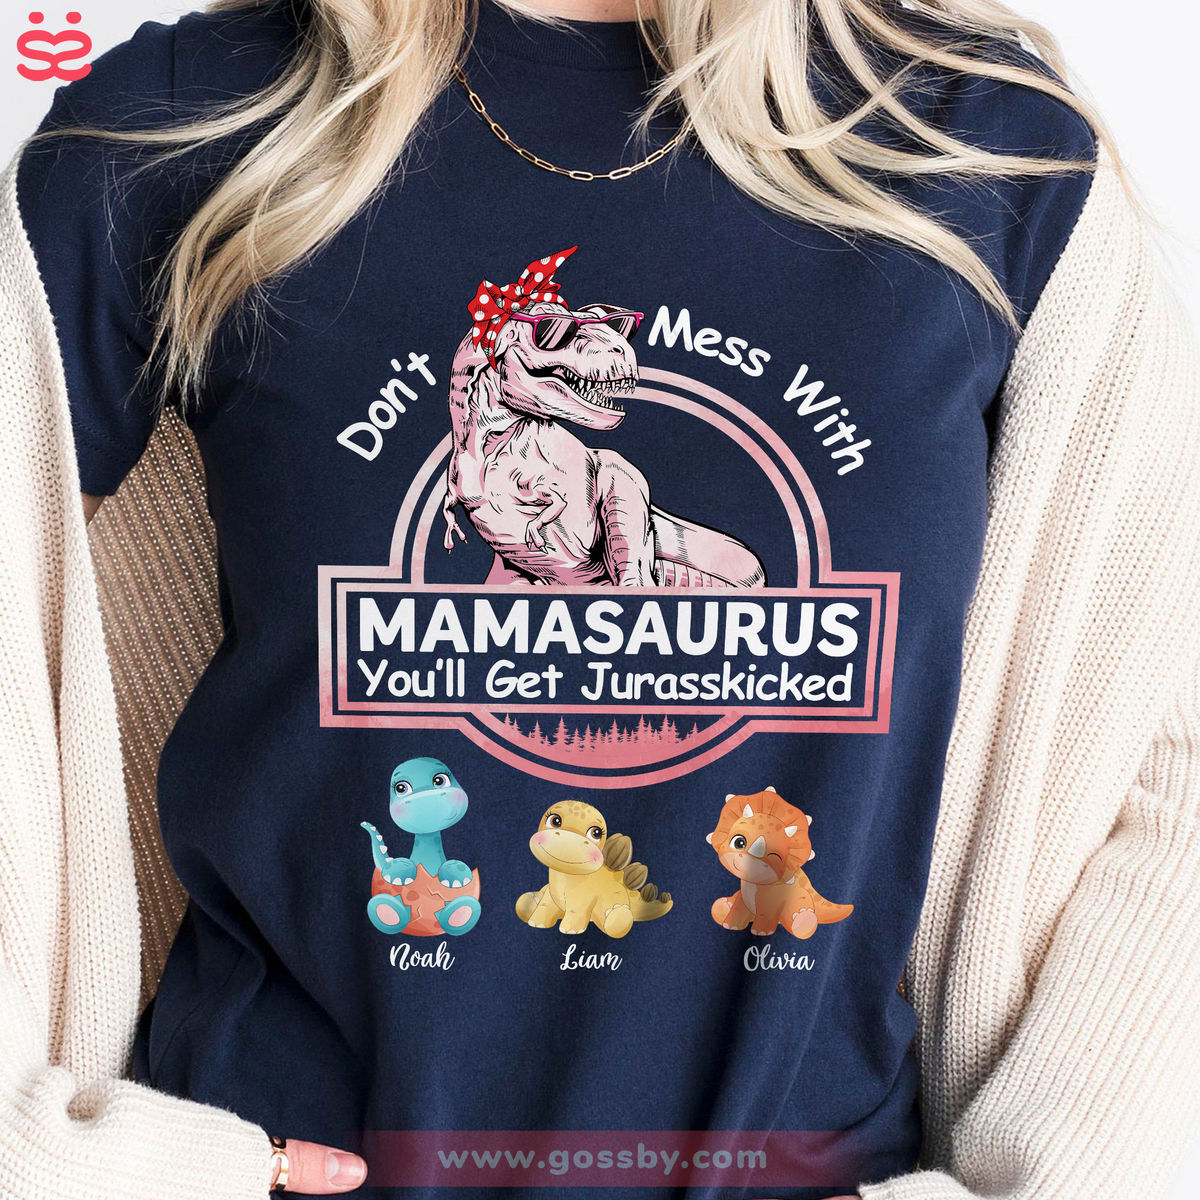 Personalized Shirt - Family - Don't Mess With Mamasaurus - Black